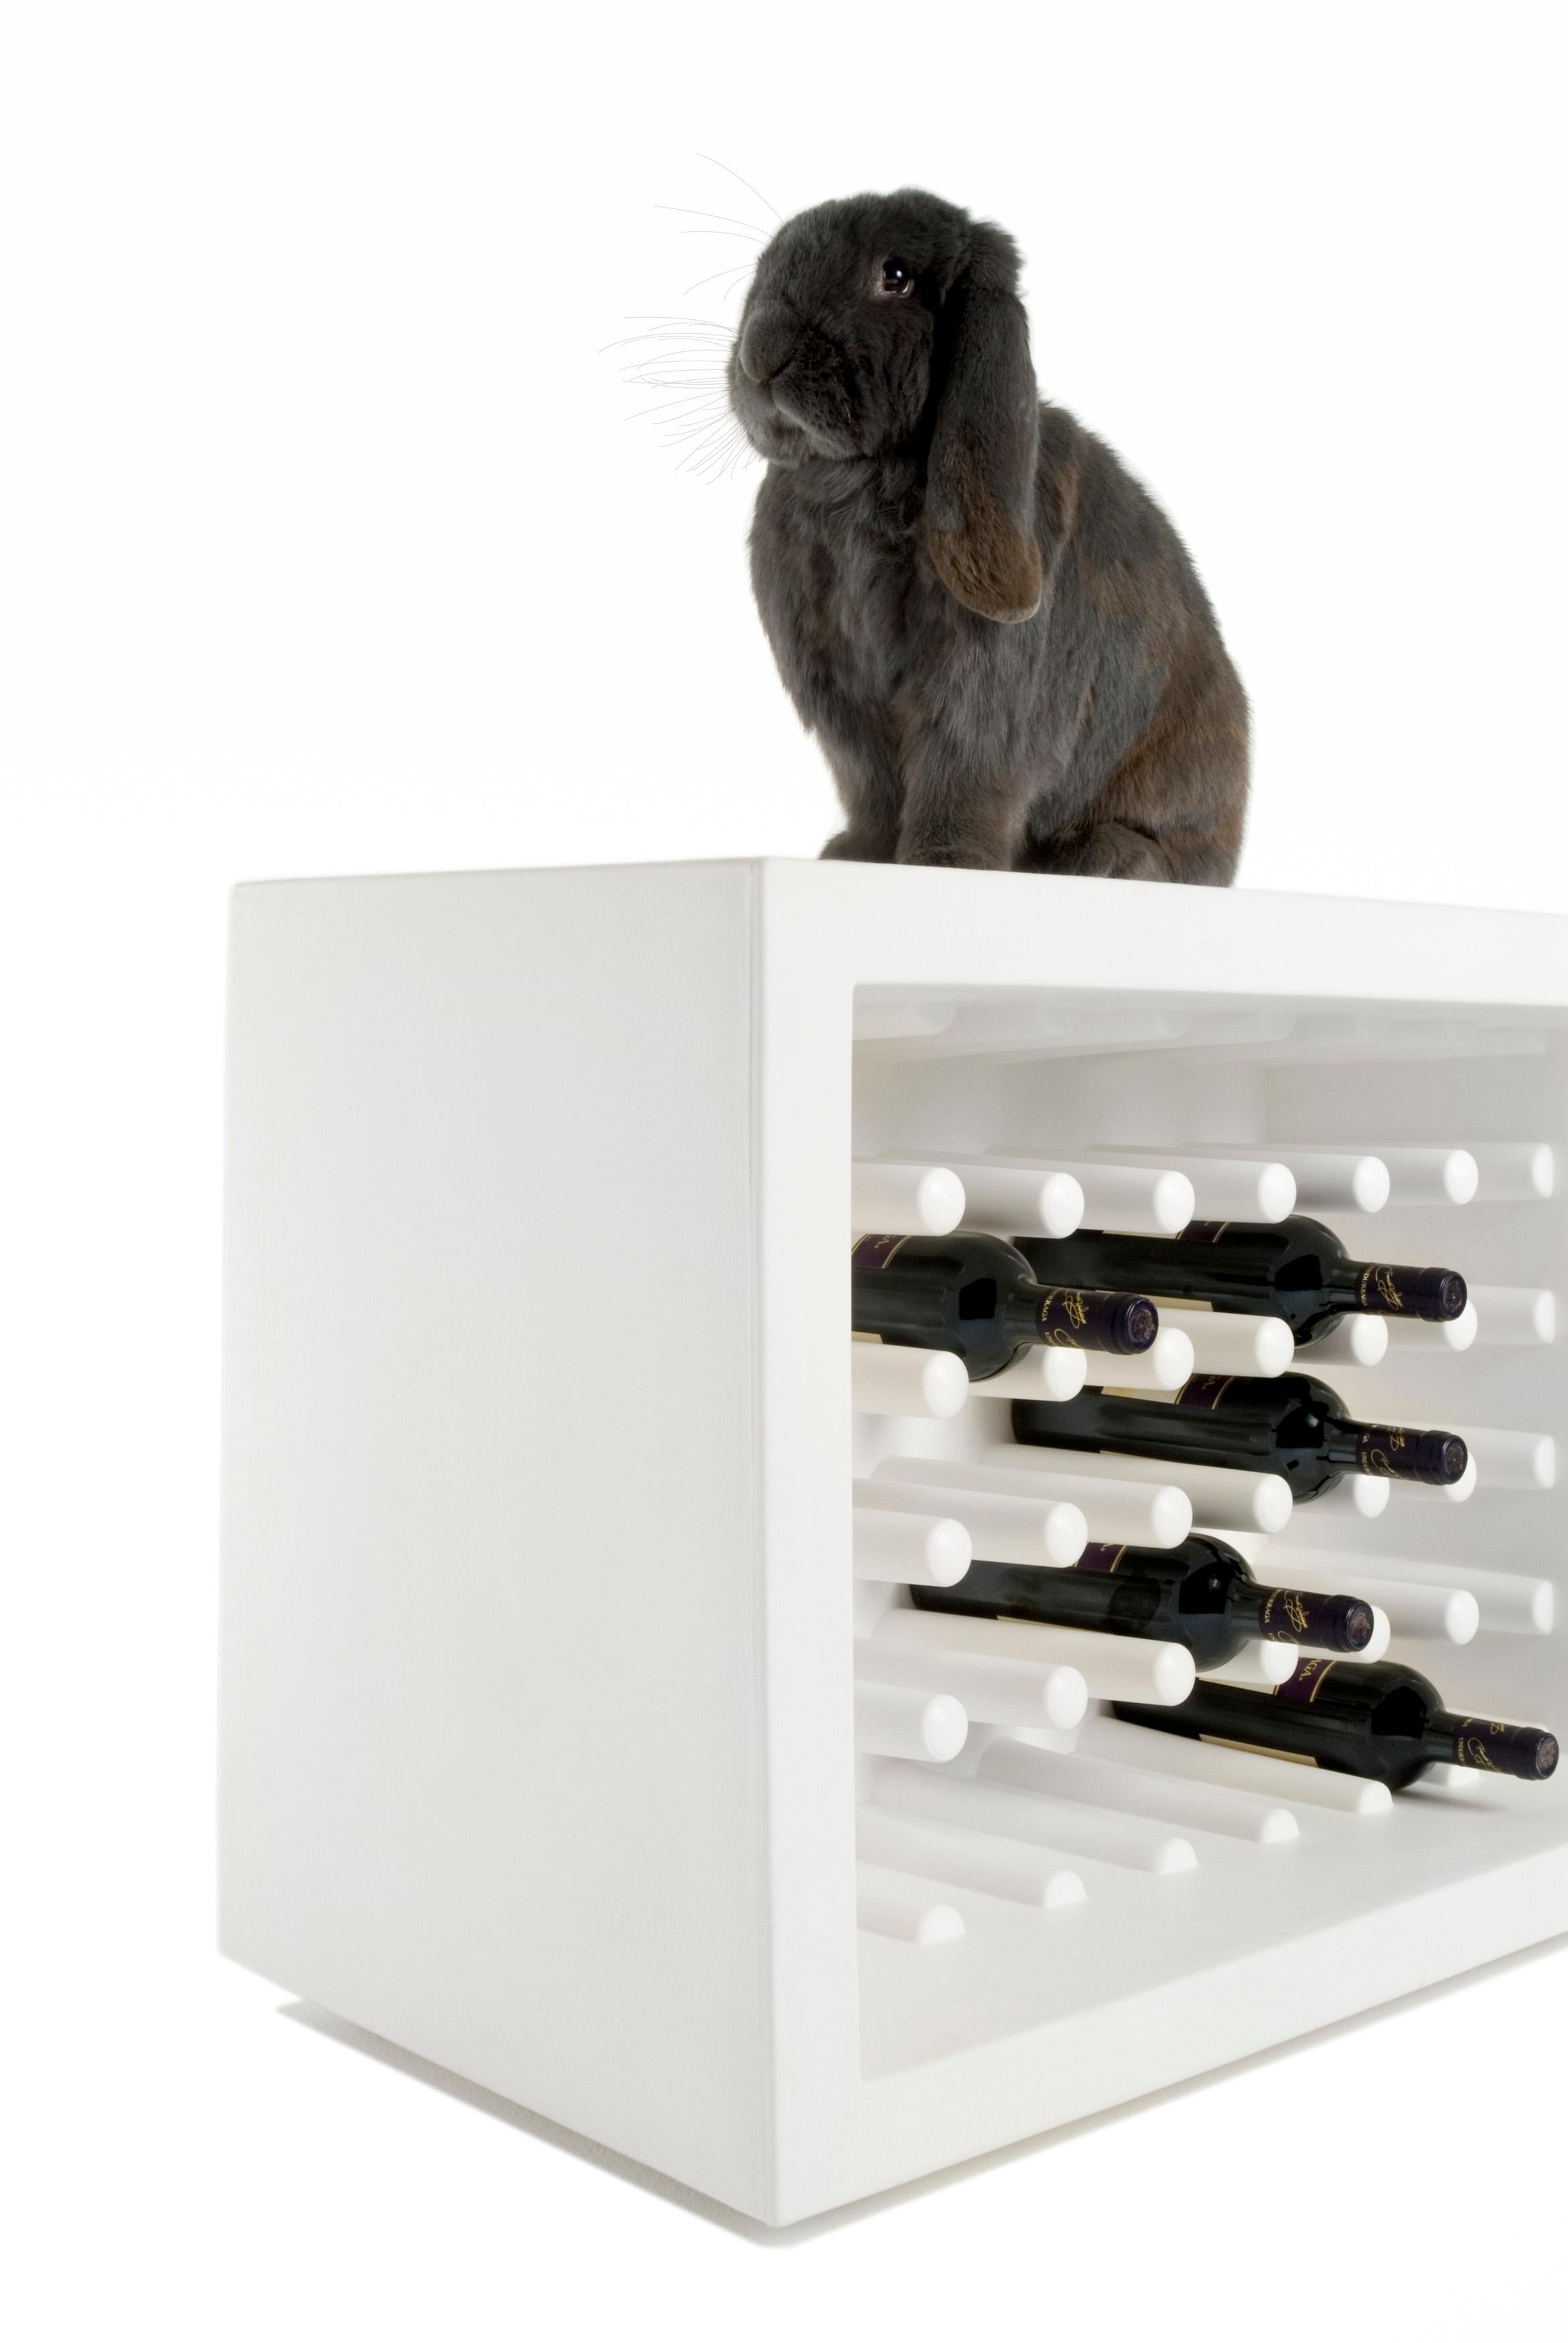 Contemporary Slide Design Bachus Wine Rack in Elephant Gray by Marcel Wanders For Sale